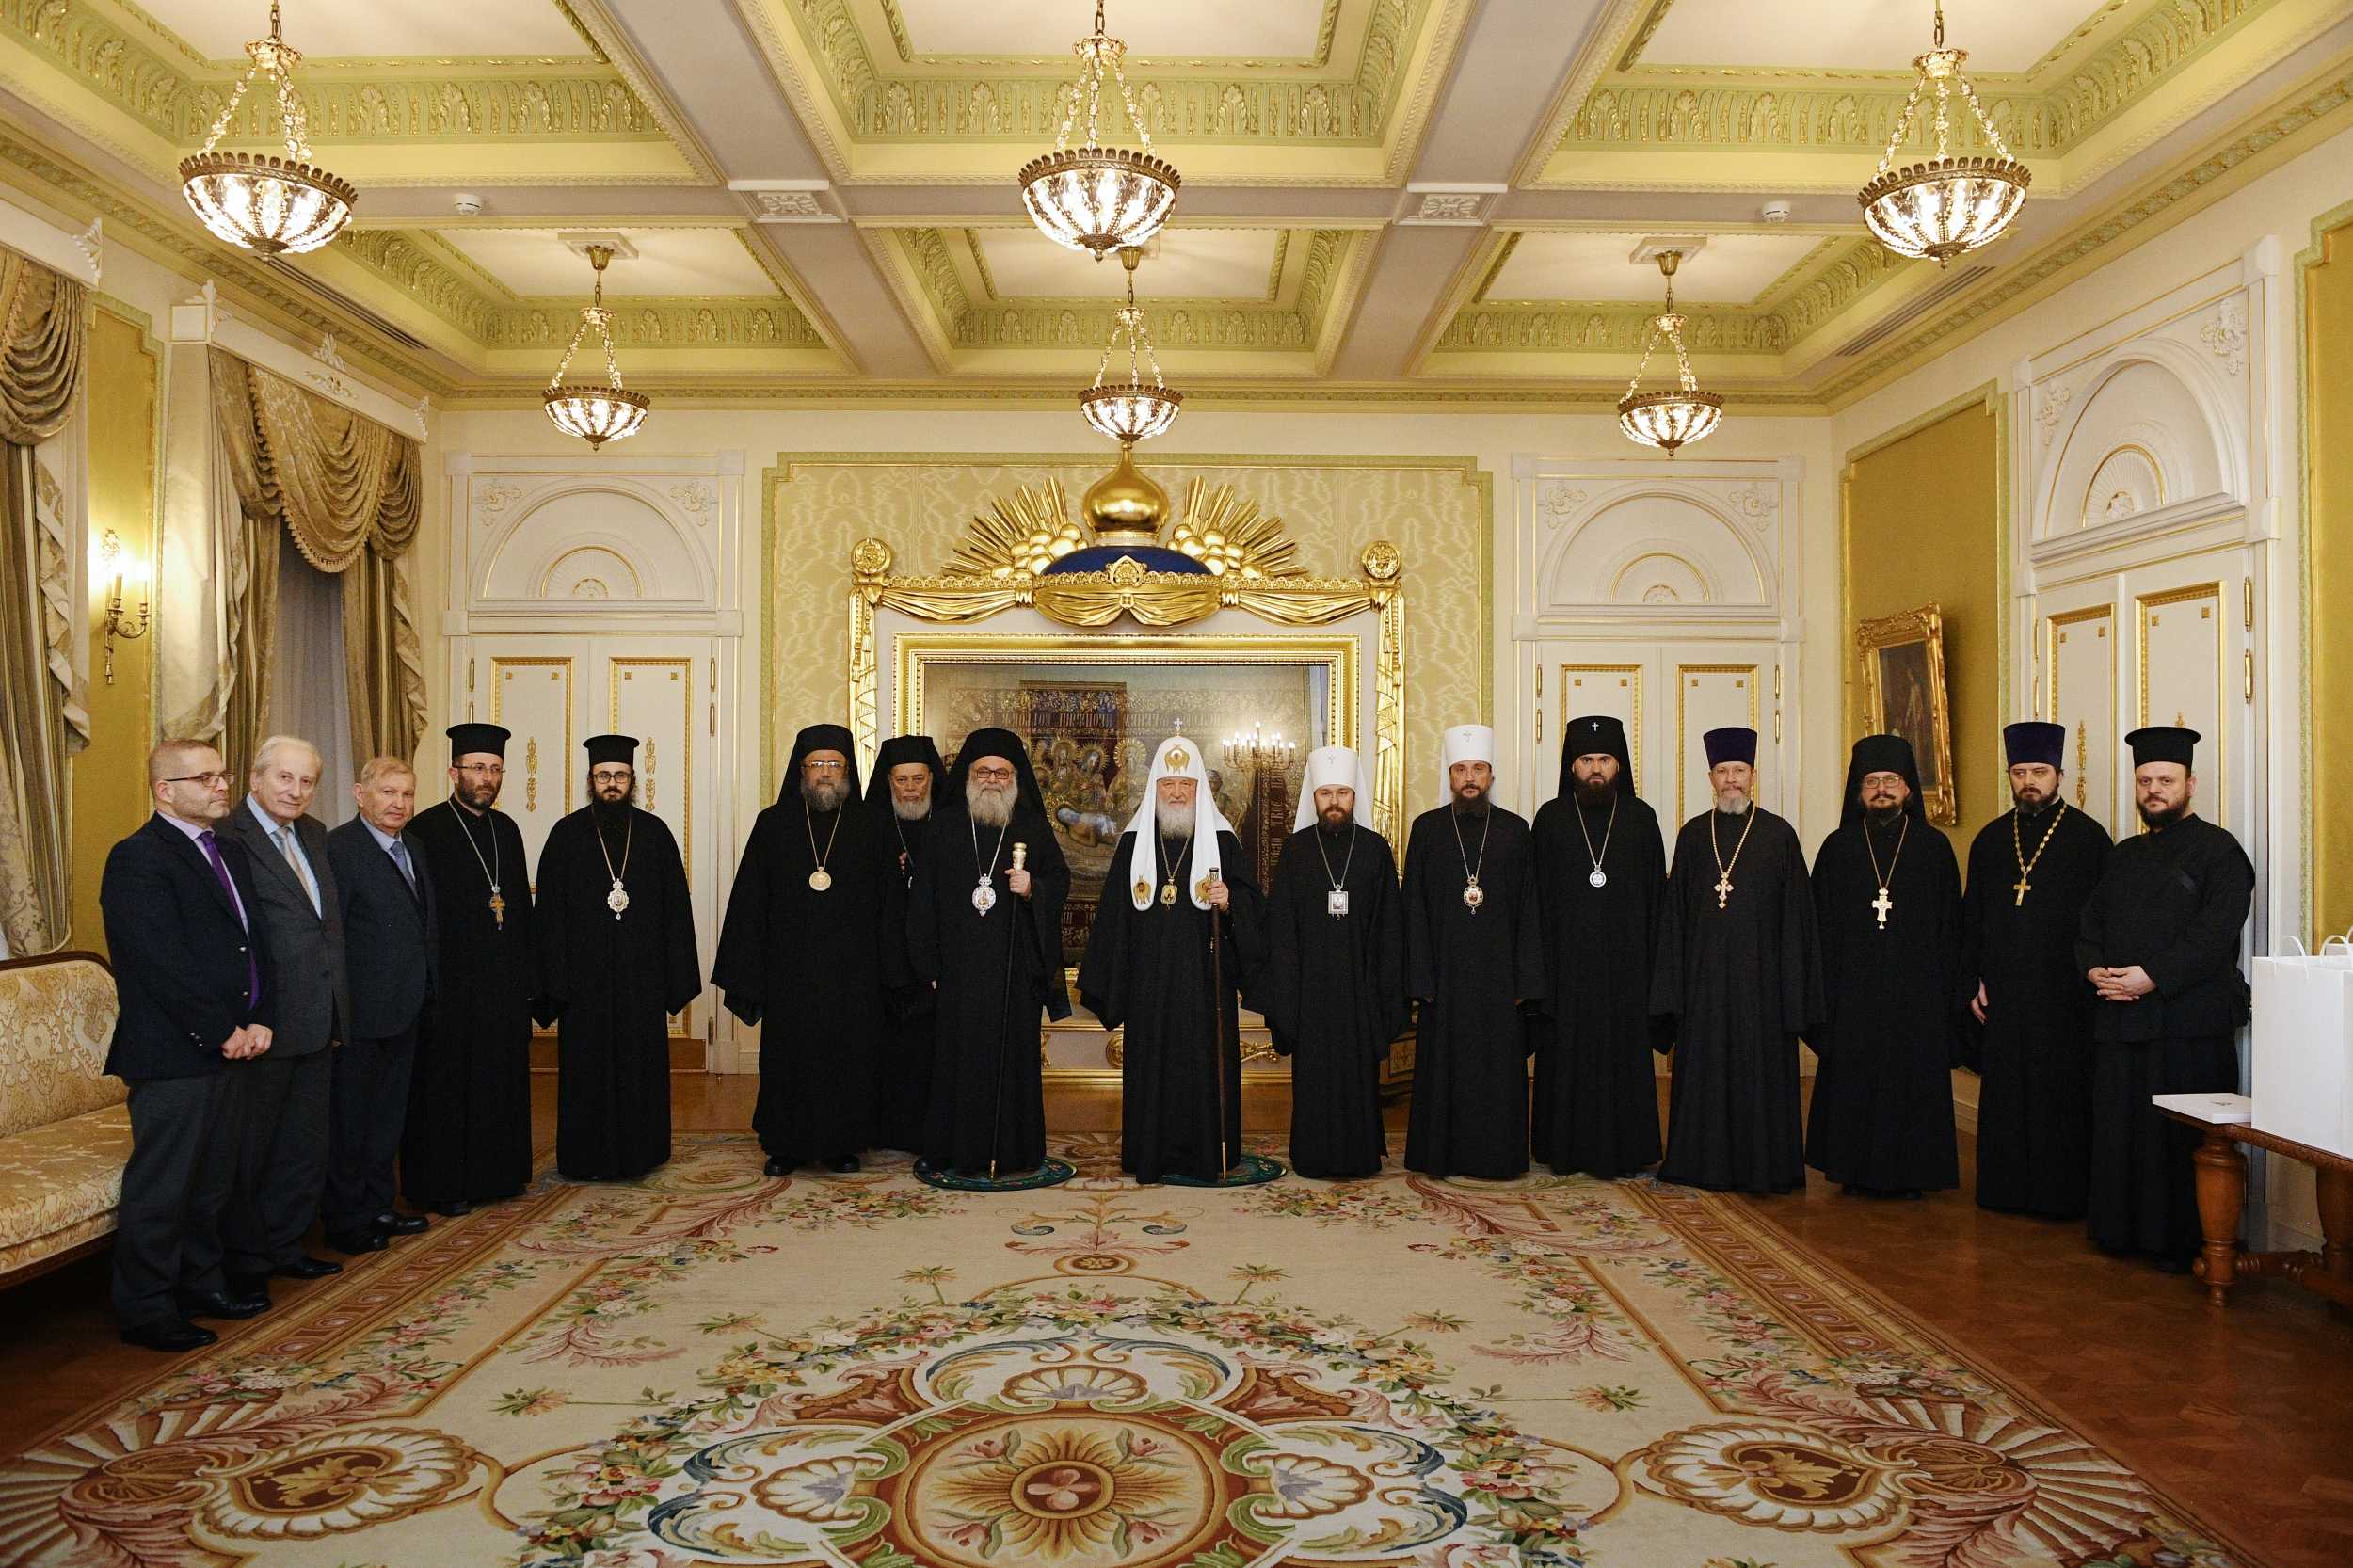 Patriarch John X and Patriarch Irinej  Received by Patriarch Kirill of Moscow & All Russia